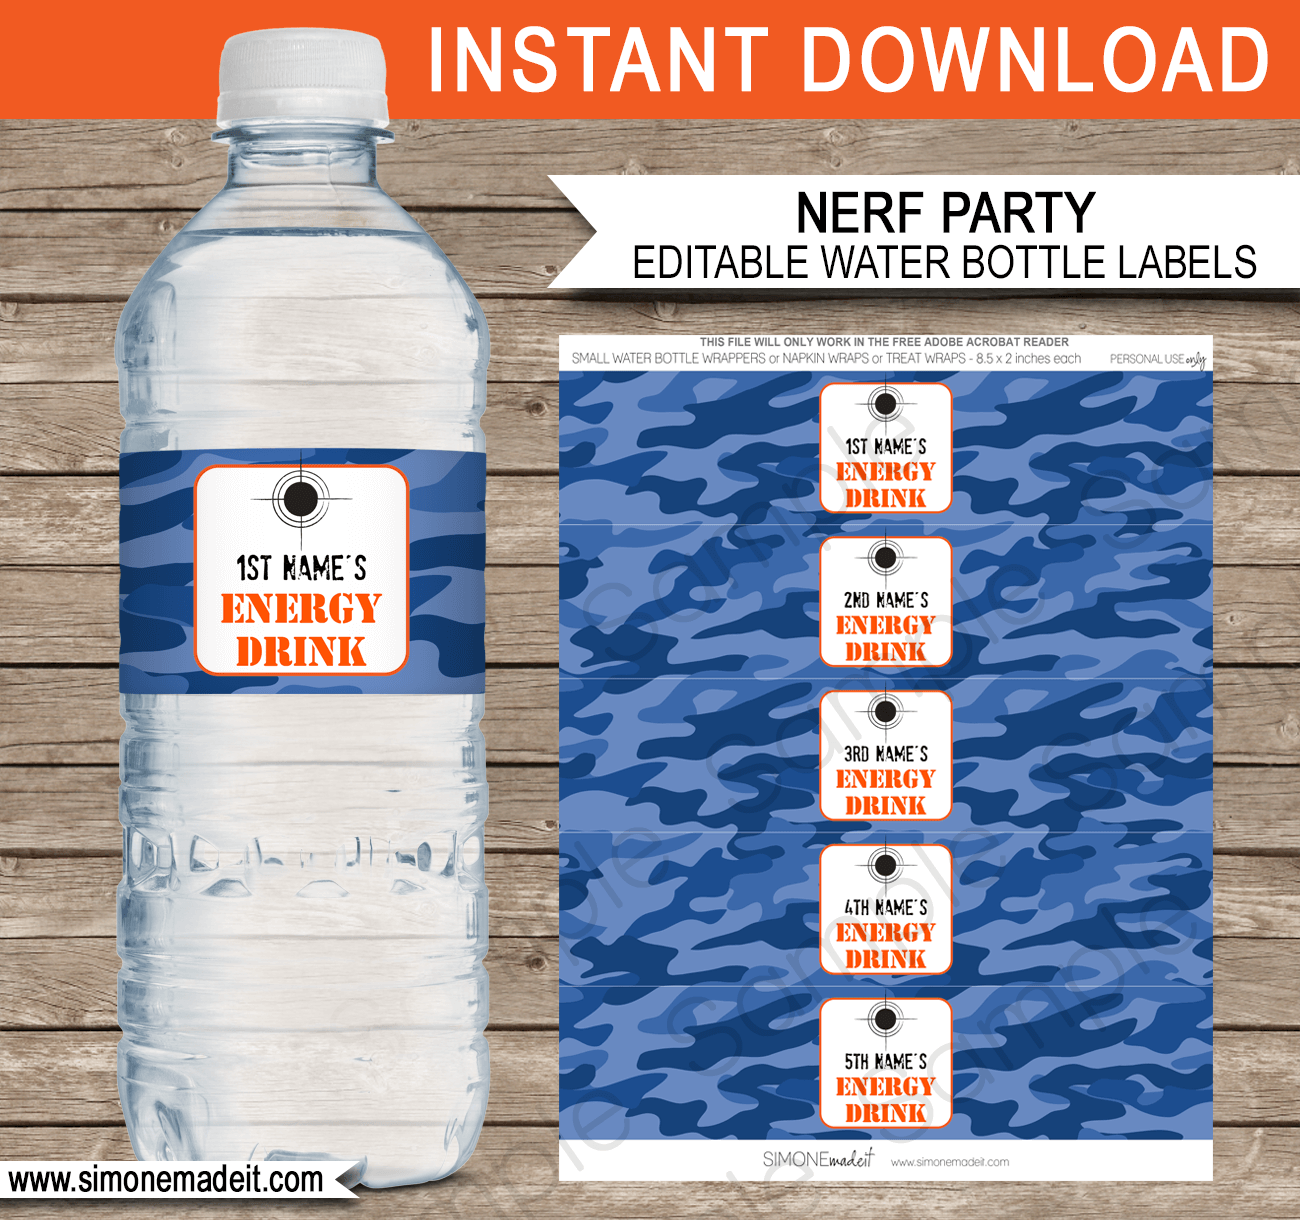 Nerf Water Bottle Labels Template | DIY Editable Birthday Party Printable Decorations | $3.00 INSTANT DOWNLOAD via SIMONEmadeit.com